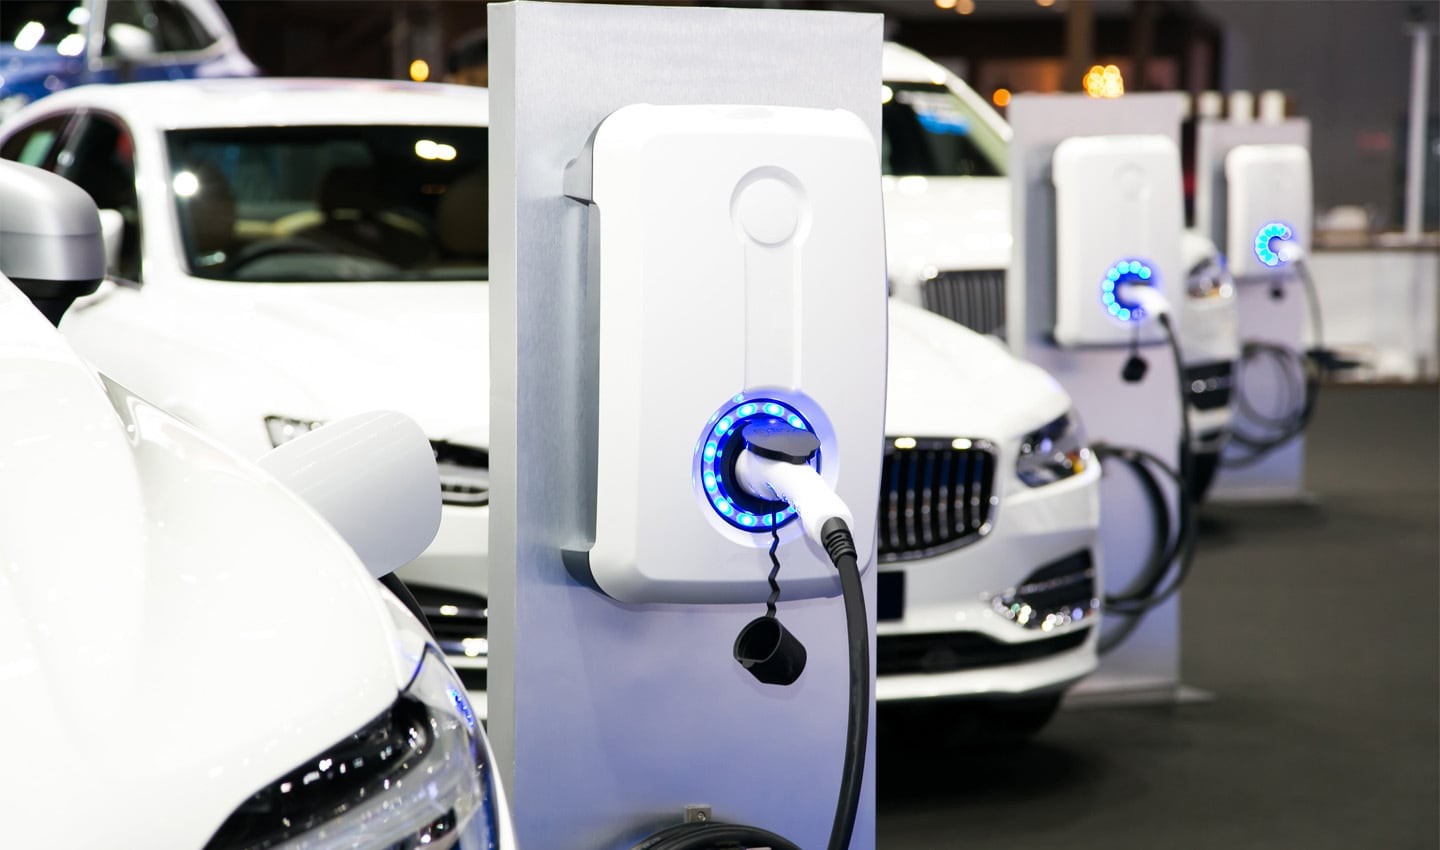 LG Electronics aims to produce EV charging stations for homes and other public places.